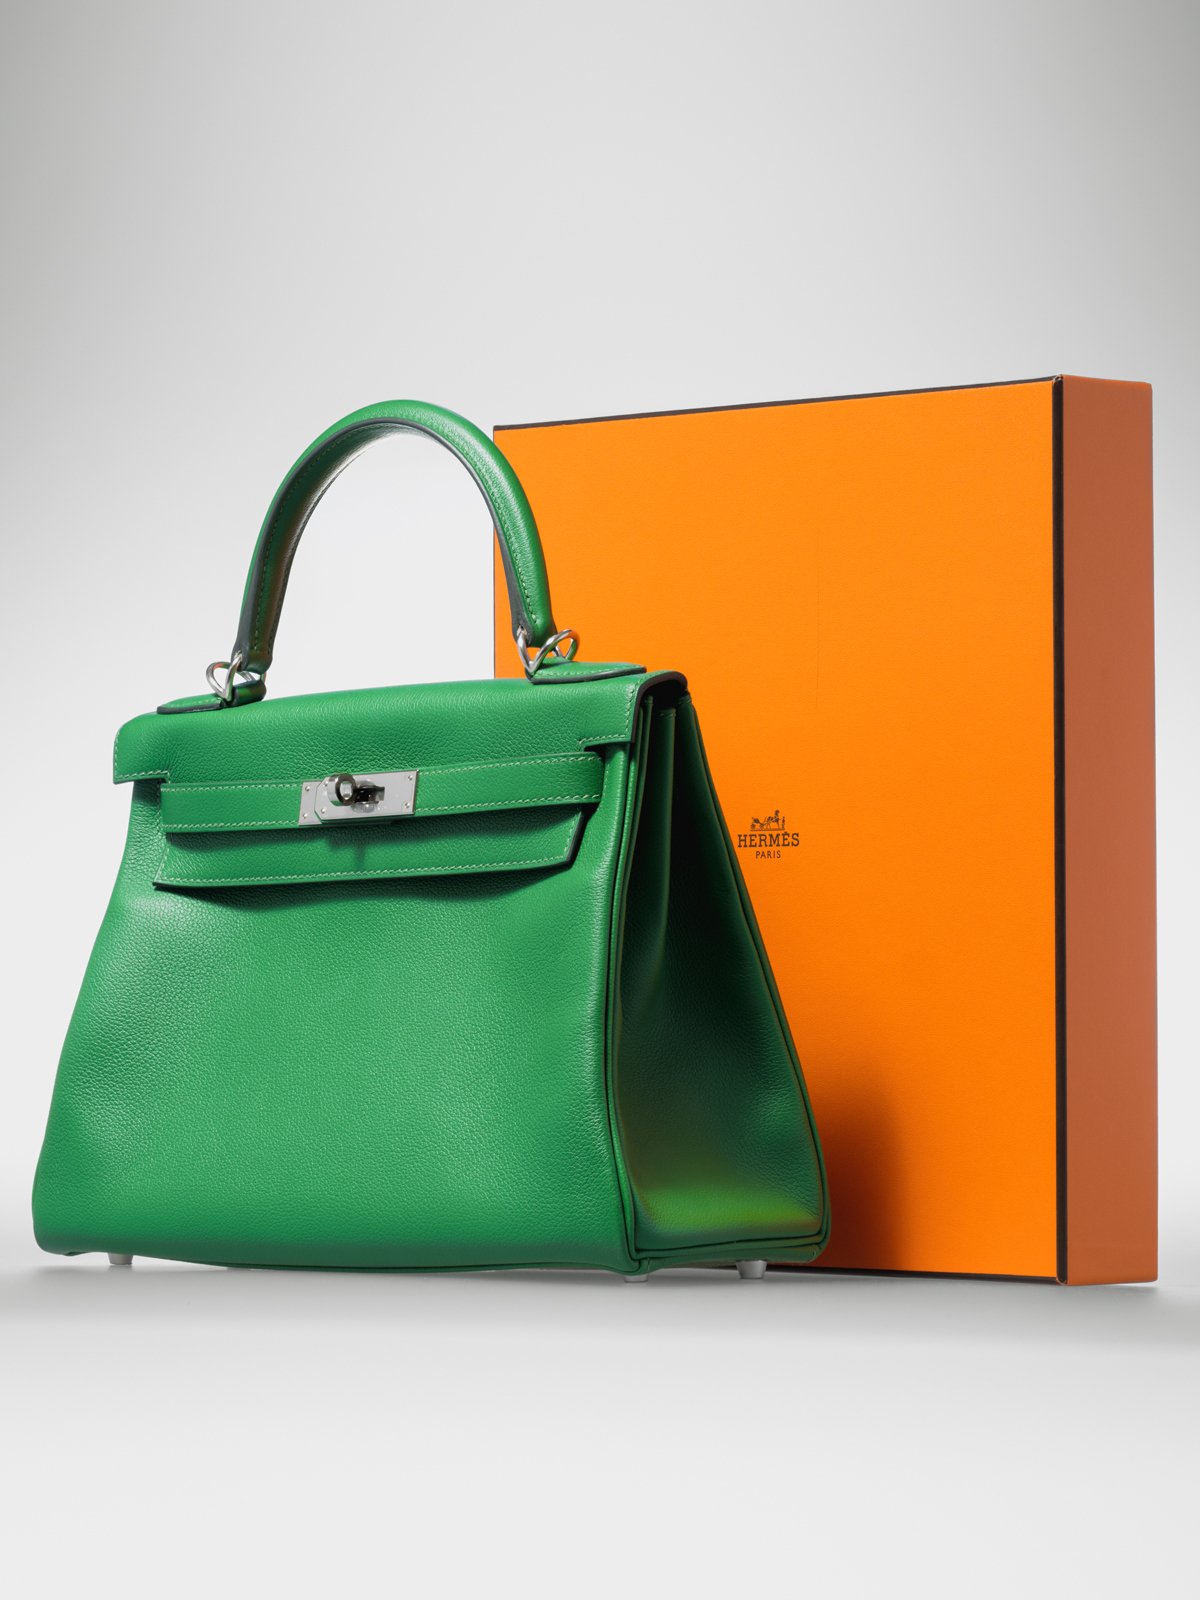 Hermes Birkin 25 Bag in Cactus Swift Leather with Gold Hardware